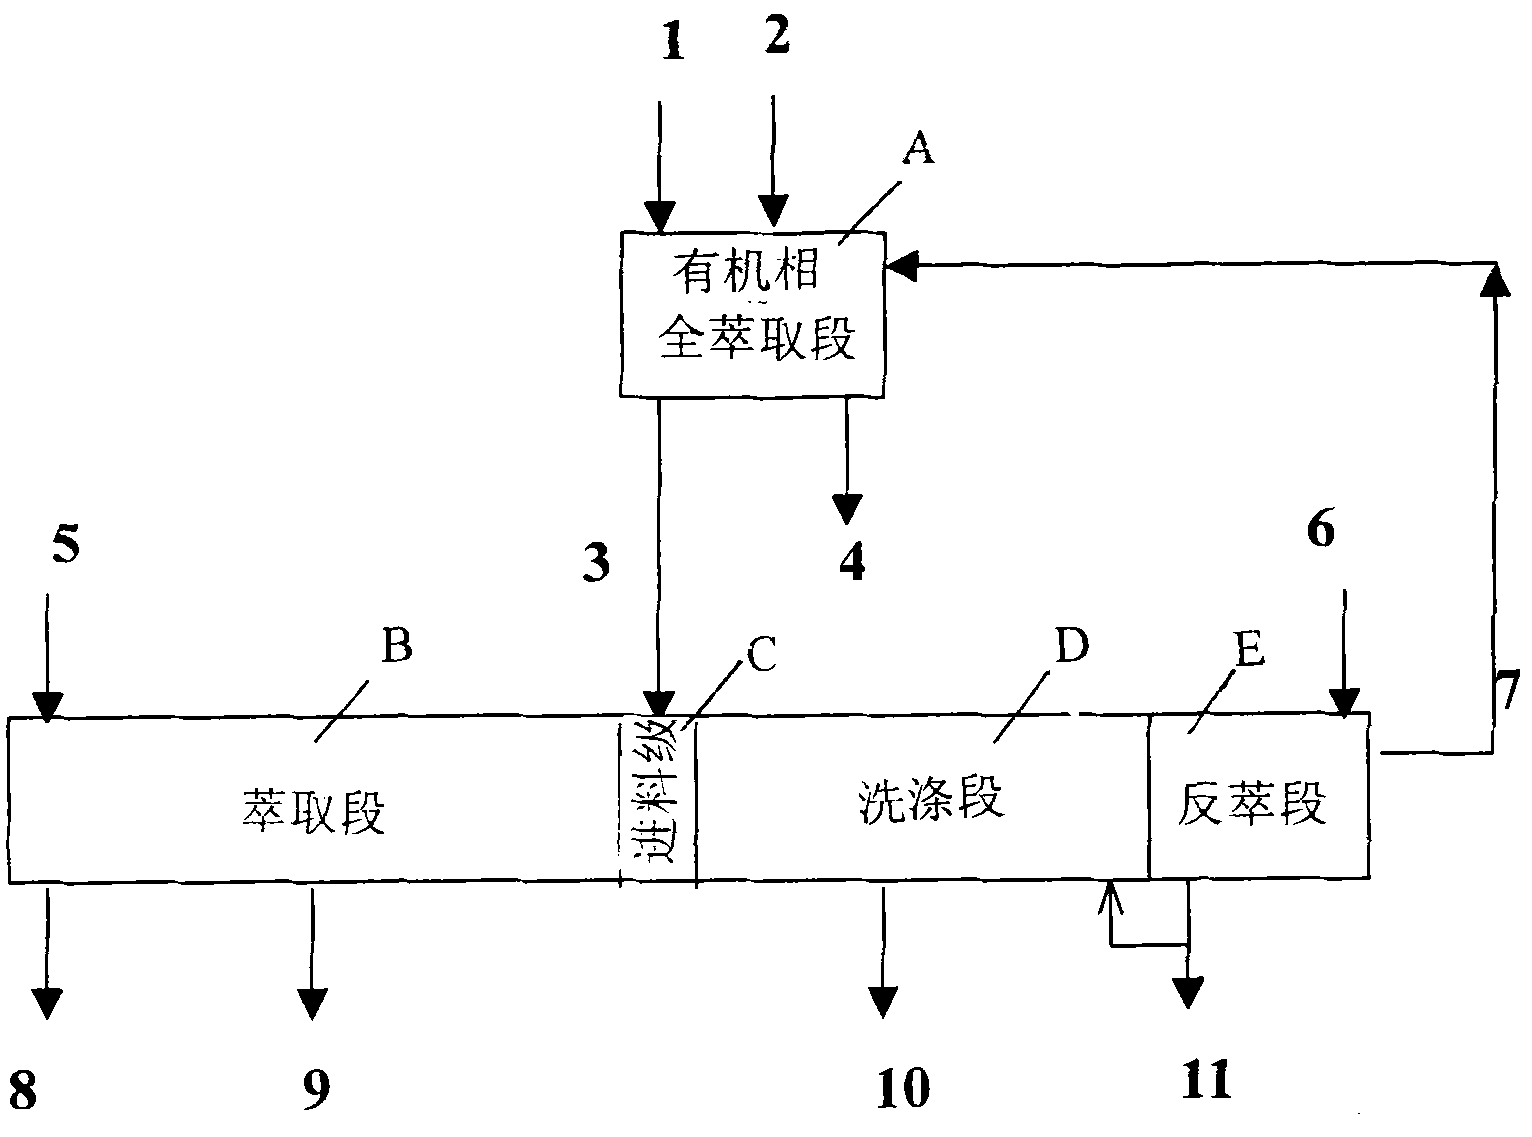 Process for solvent extraction separation purification of rare earth element